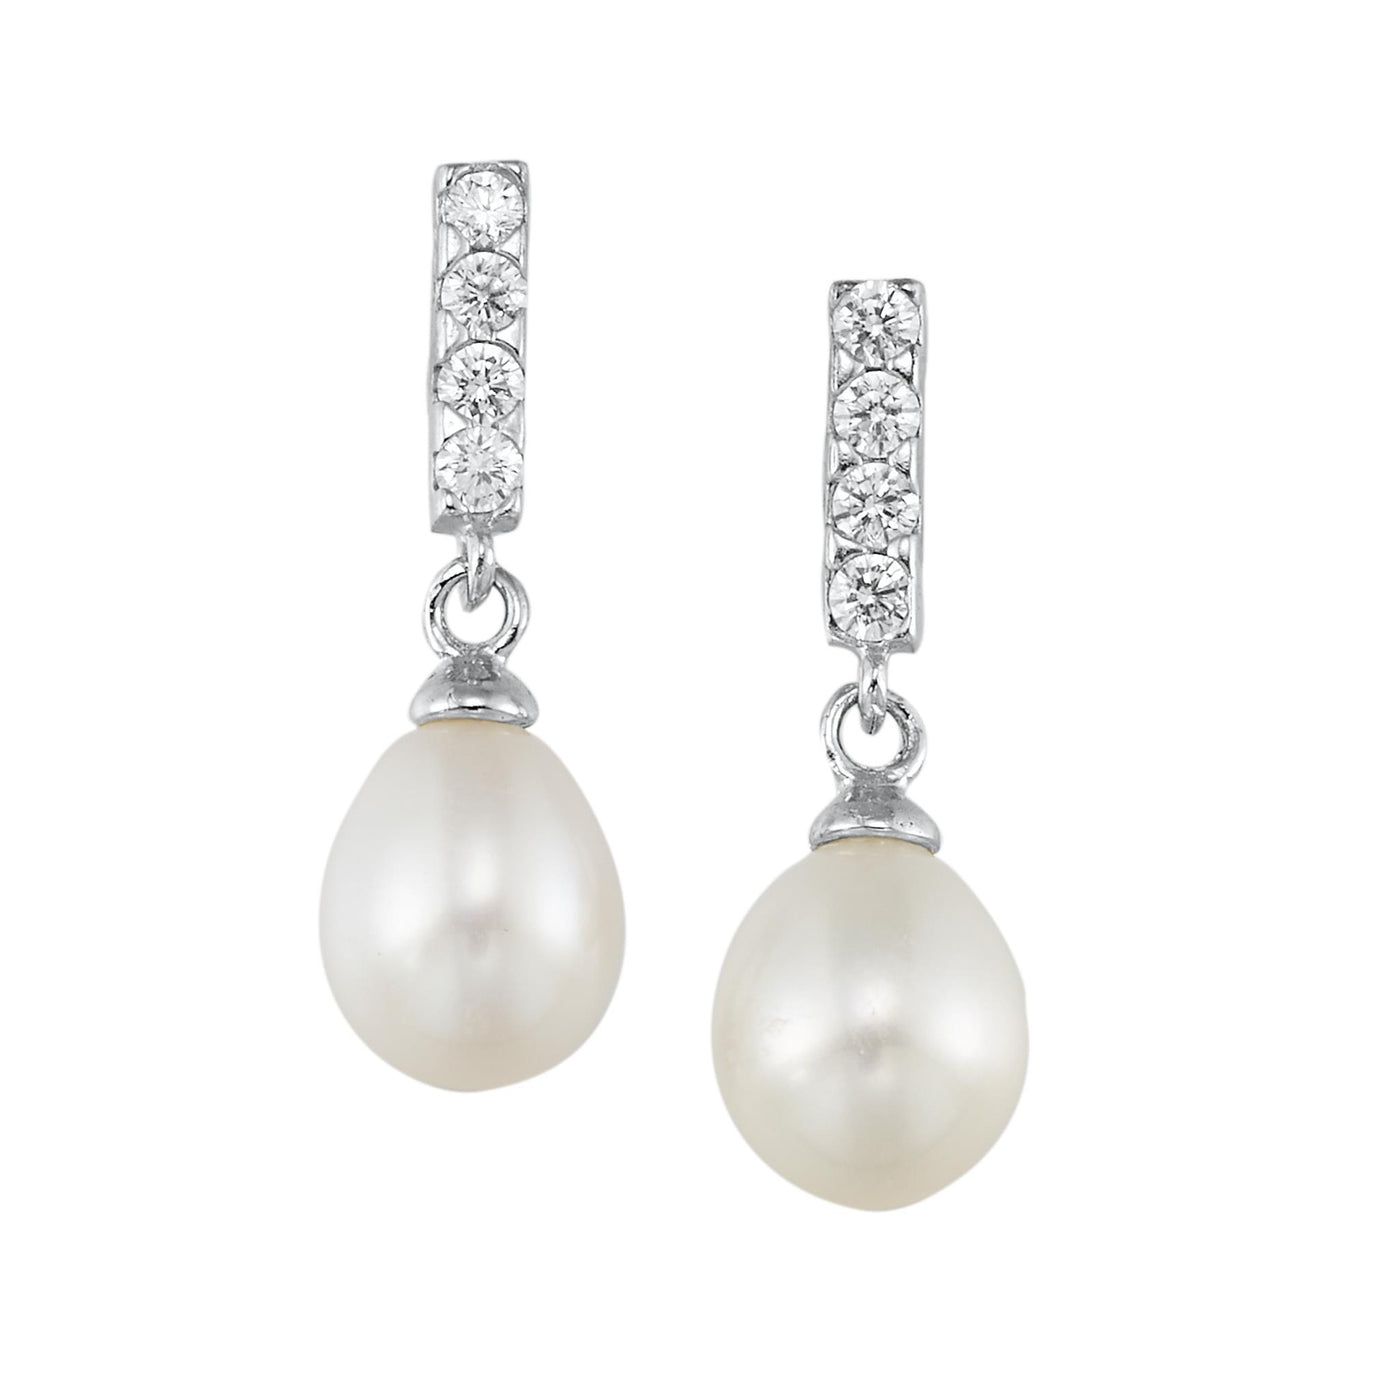 Sterling Silver 1.5ctw Dangle Style Earrings Featuring White Freshwater Pearls